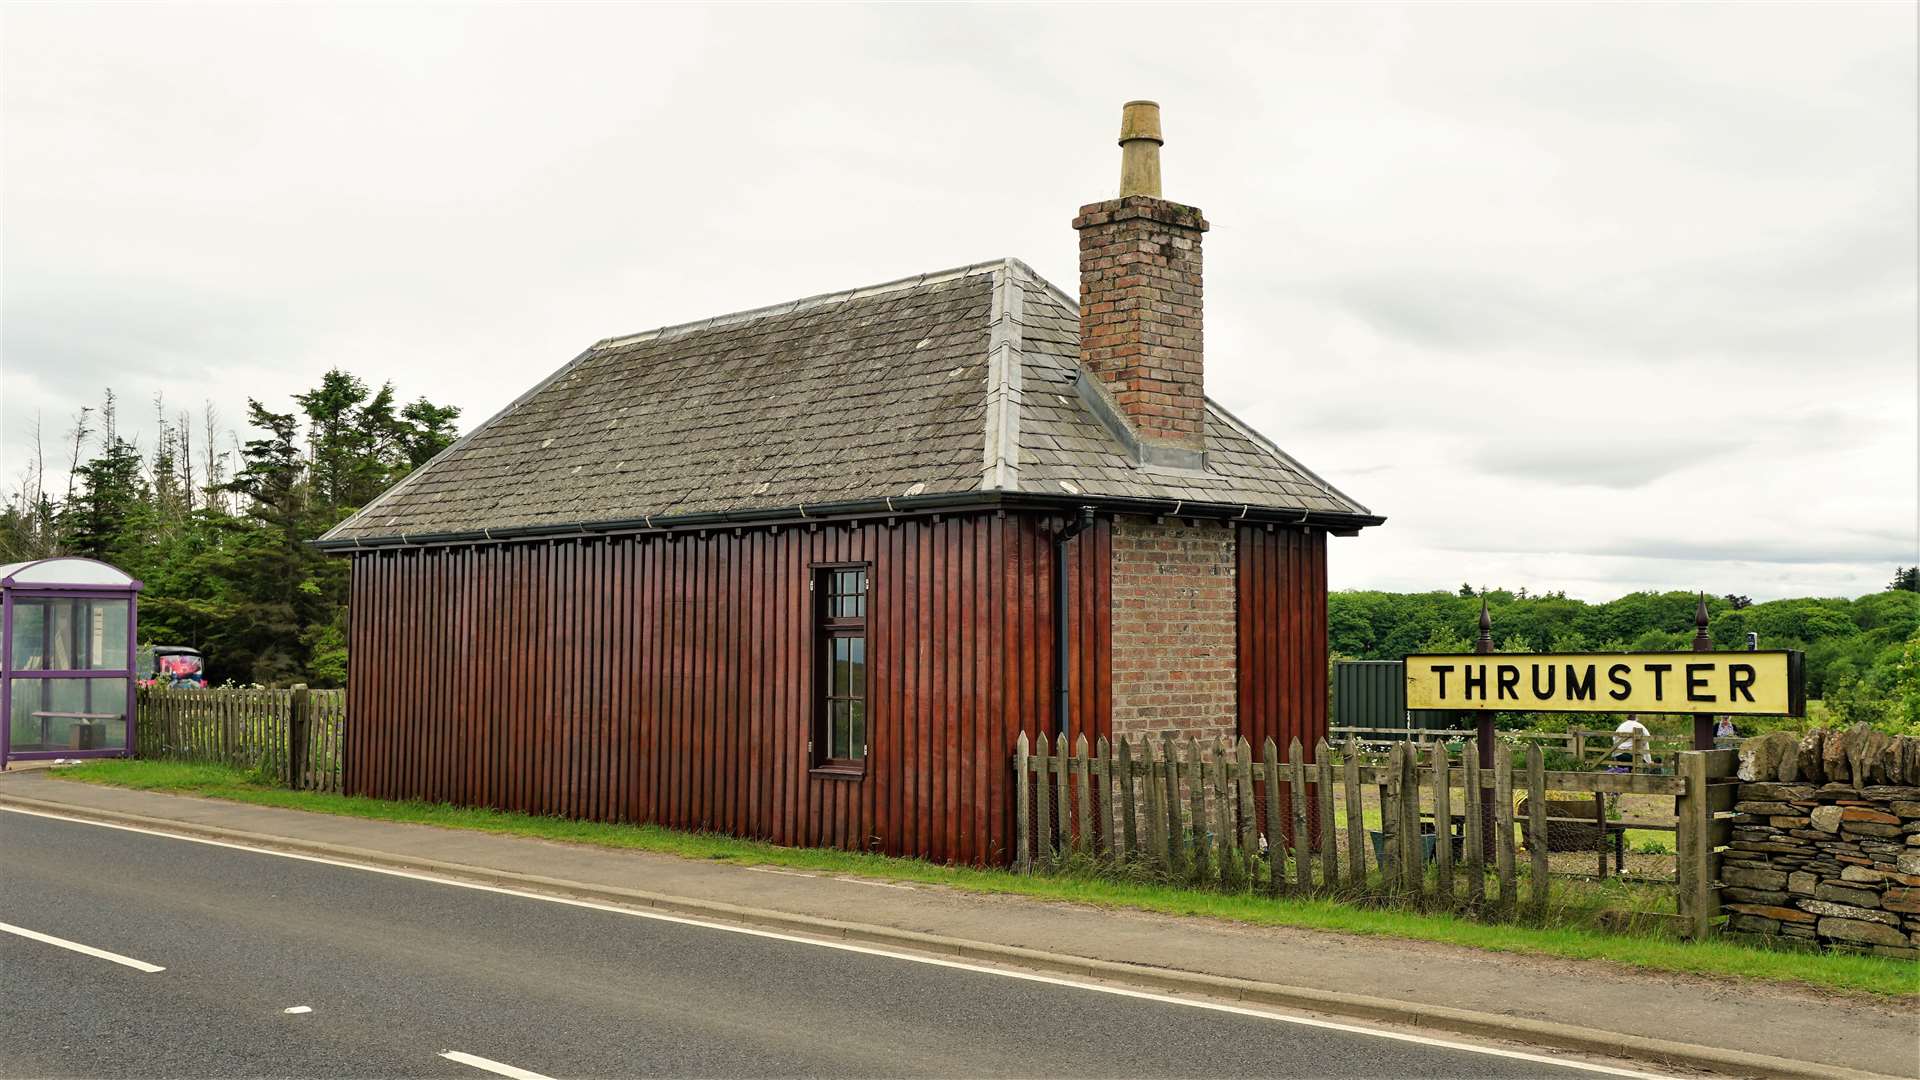 The refurbished Thrumster railway station in the village. Picture: DGS